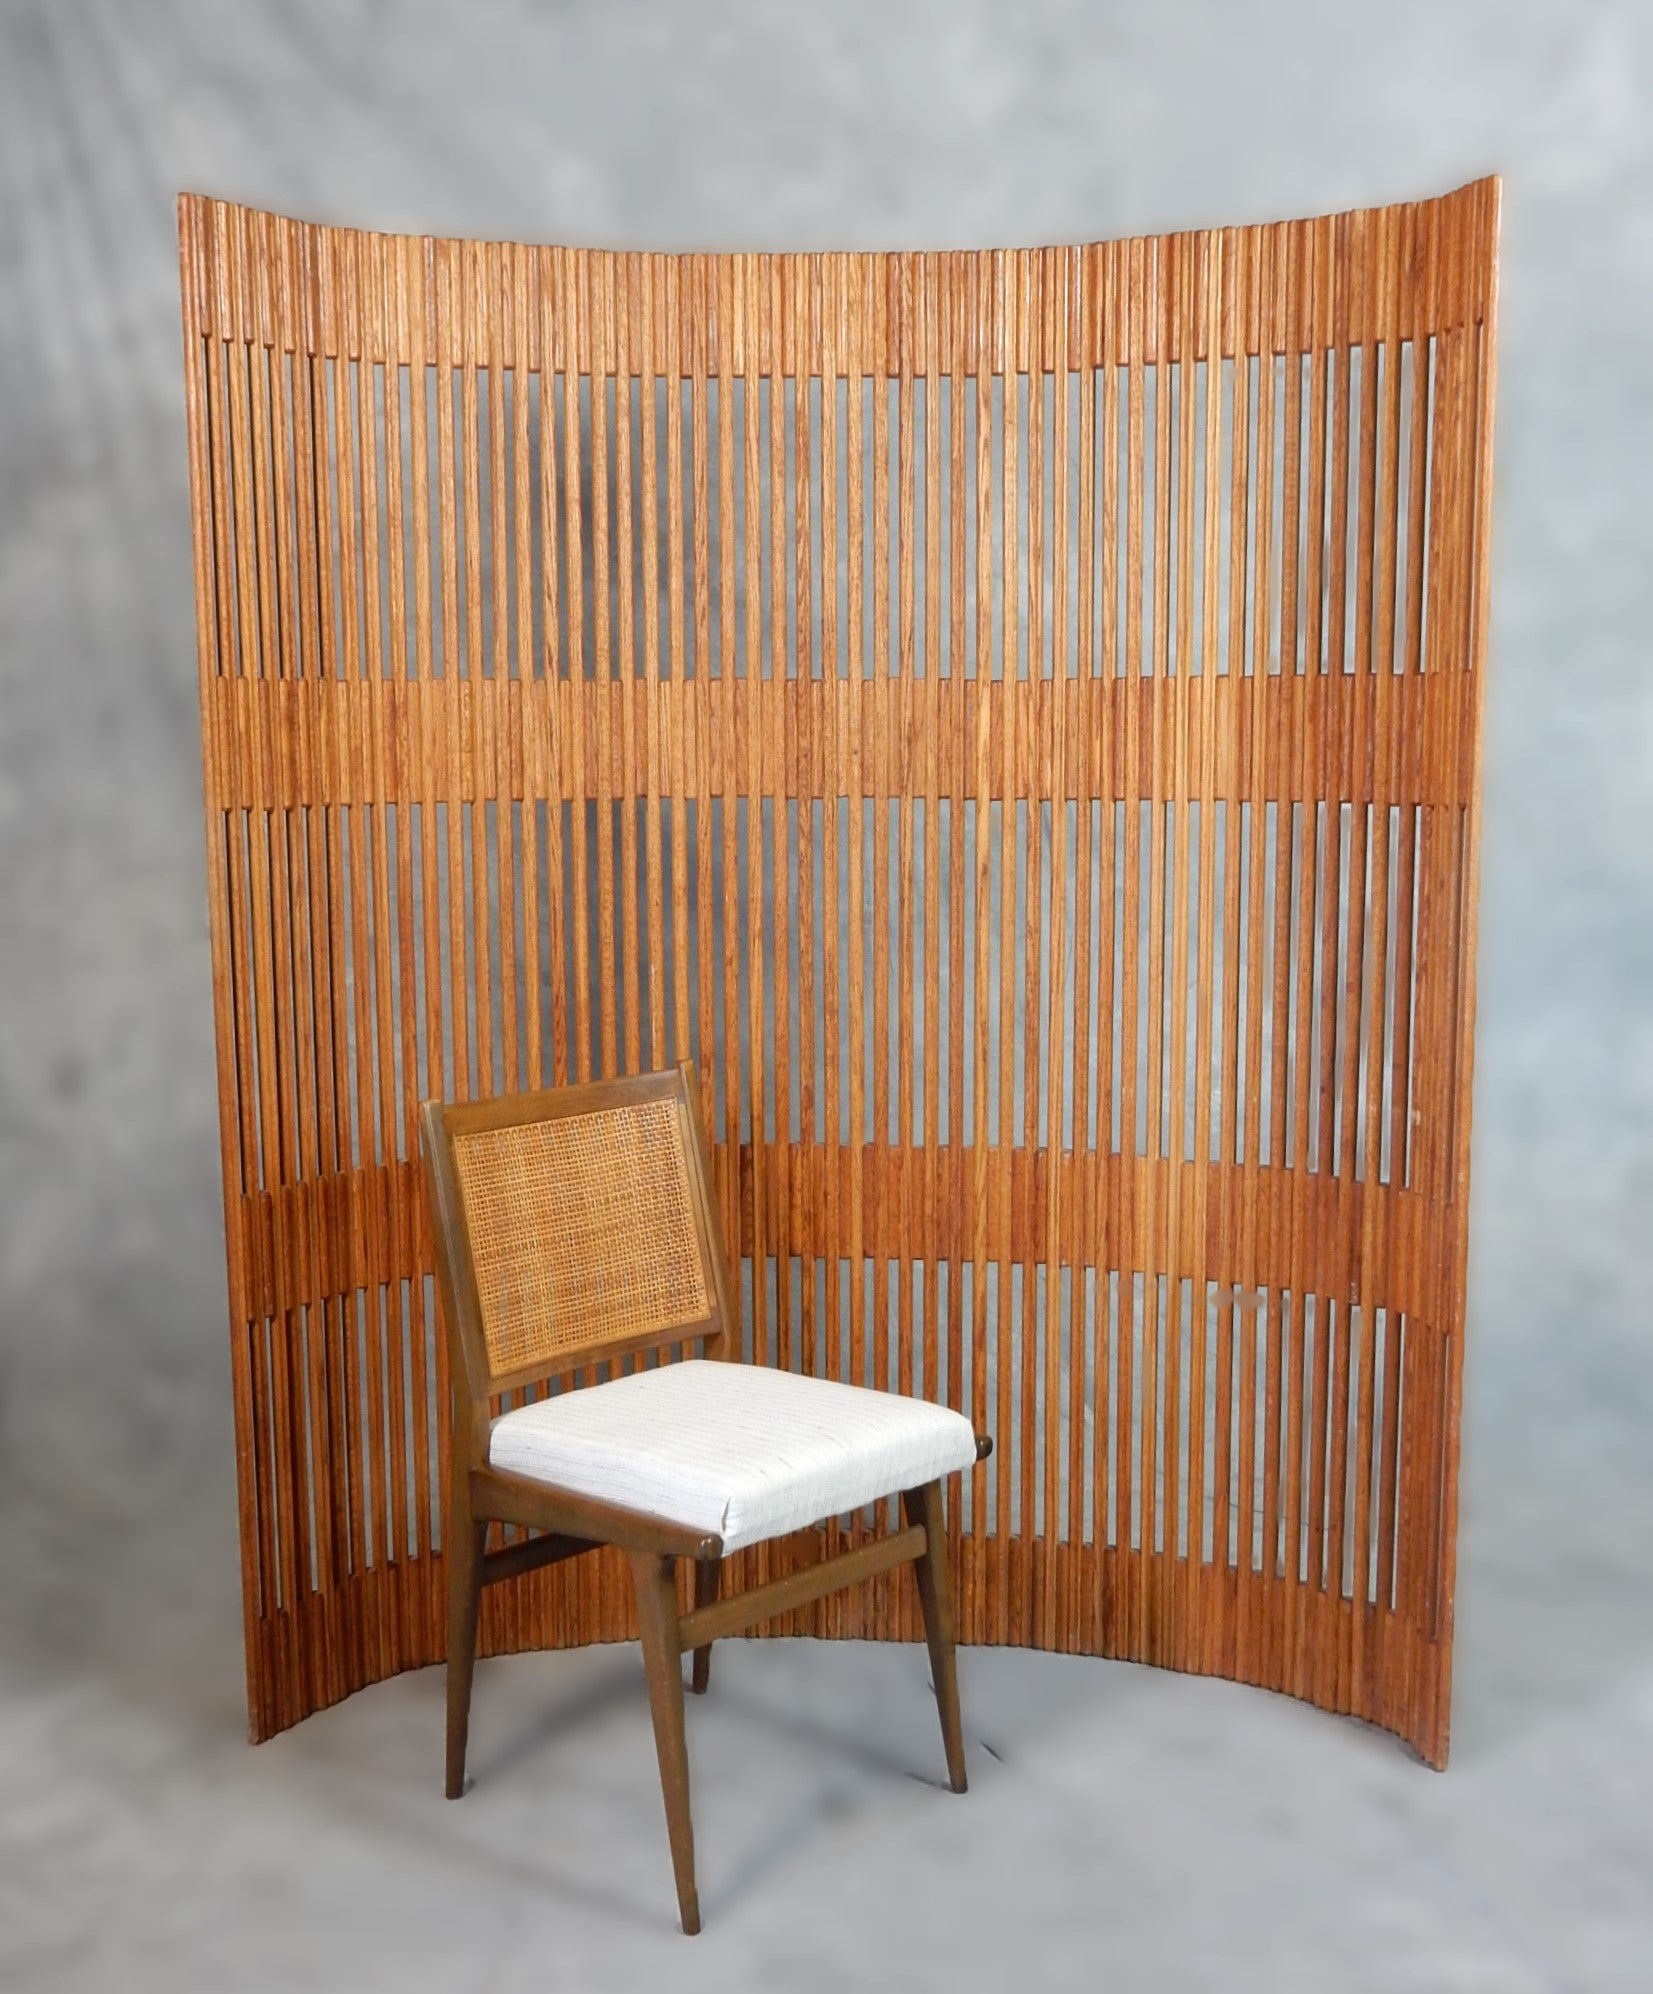 Vintage articulated paravent screen in the style of Baumann France. 
Flexible Paravent made out of strips of wood allows the screen to be placed in different shapes and angels. Adroitly constructed of solid oak with no sign of connectors or